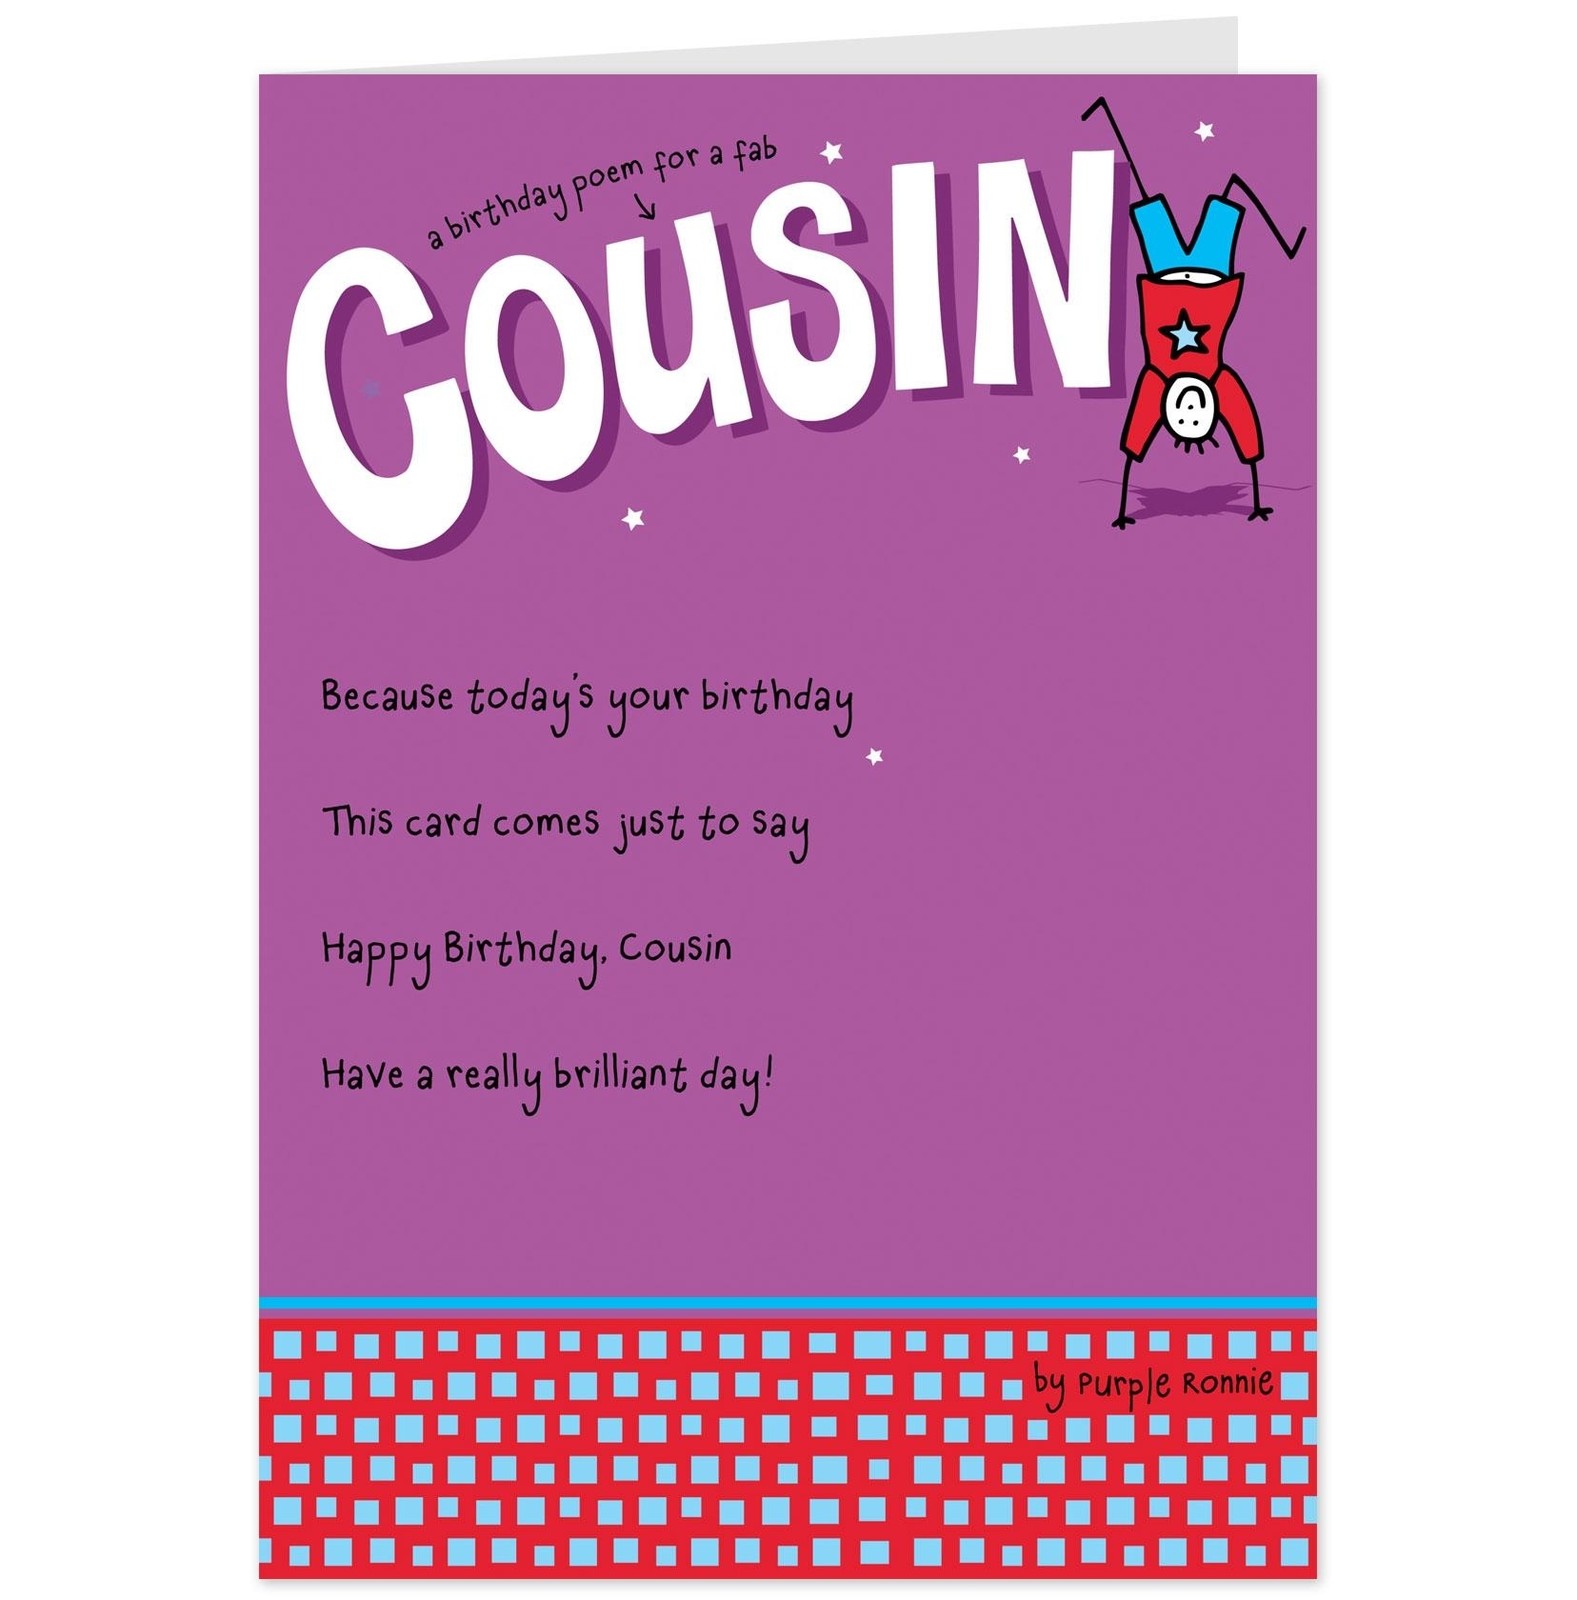 Happy birthday images For Cousin💐 - Free Beautiful bday cards and pictures  | BDay-card.com - page 2